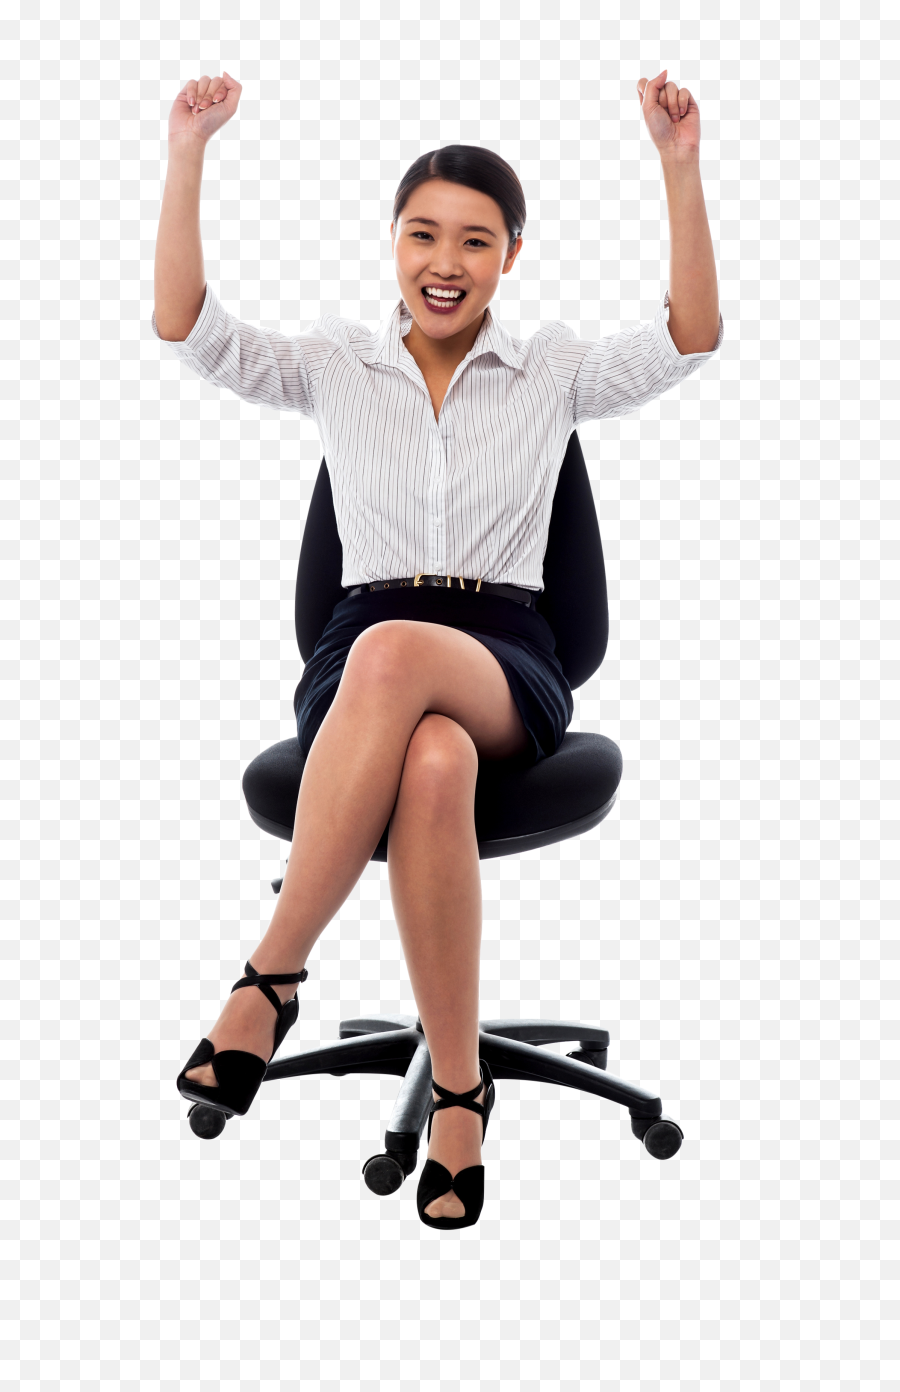 Happy Girl Png Image - Purepng Free Transparent Cc0 Png Stock Image Girl Png,Female Png